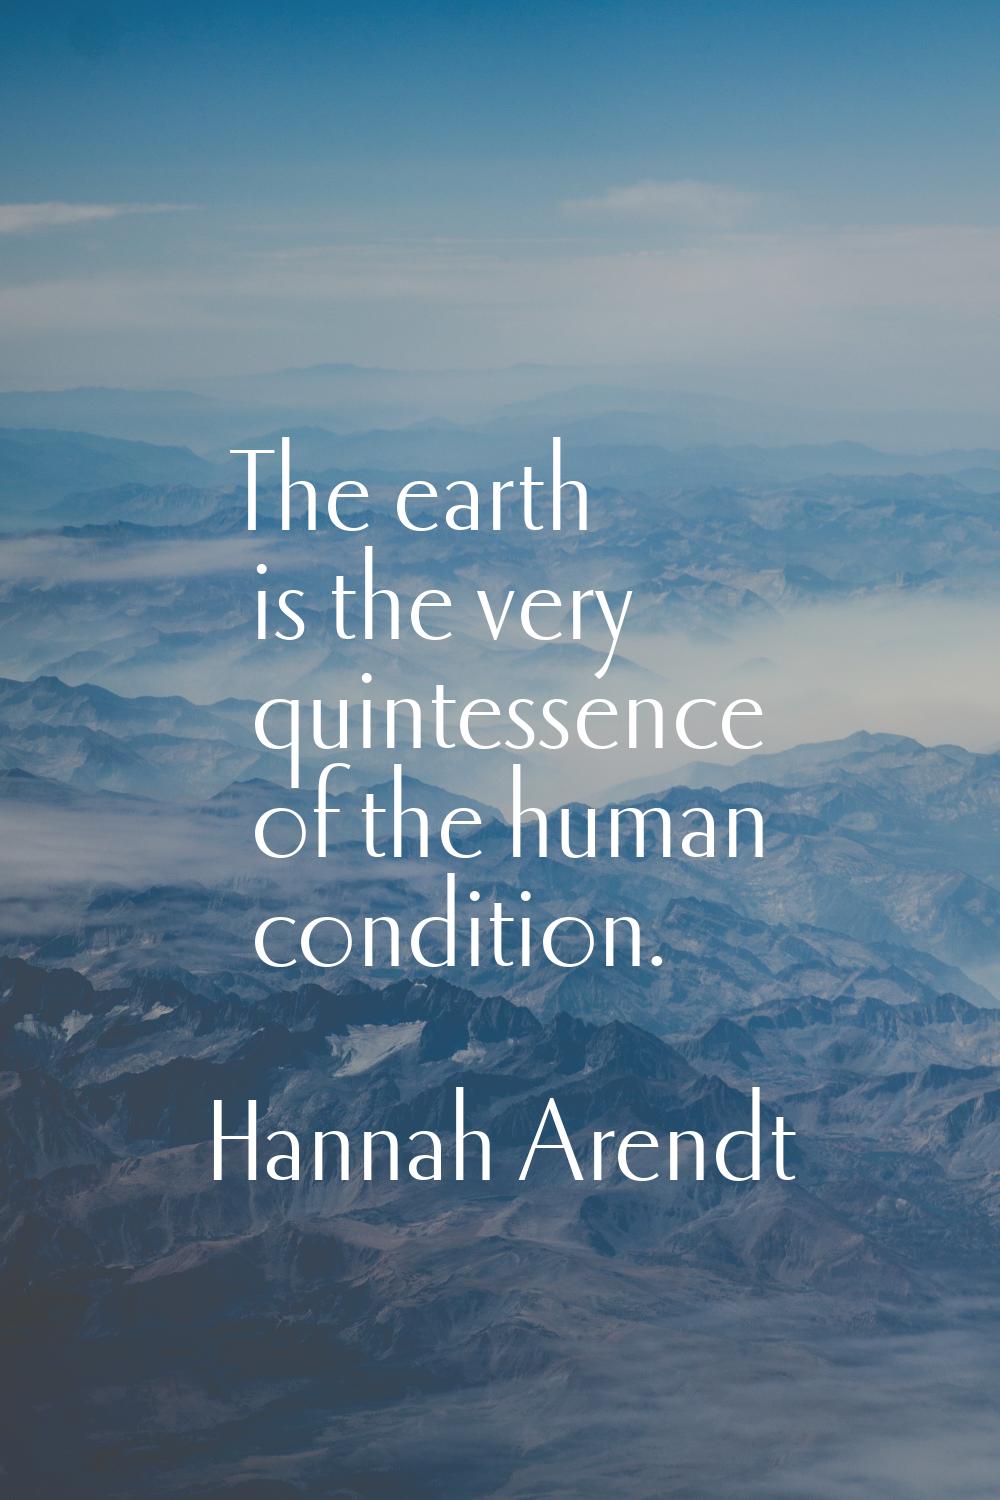 The earth is the very quintessence of the human condition.